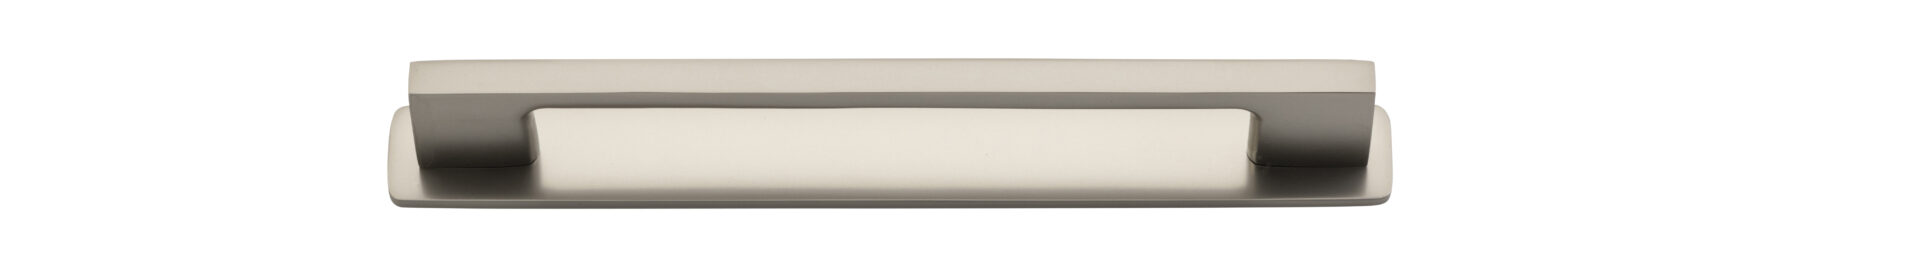 0552B - Cali Cabinet Pull with Backplate - CTC 160mm - Satin Nickel